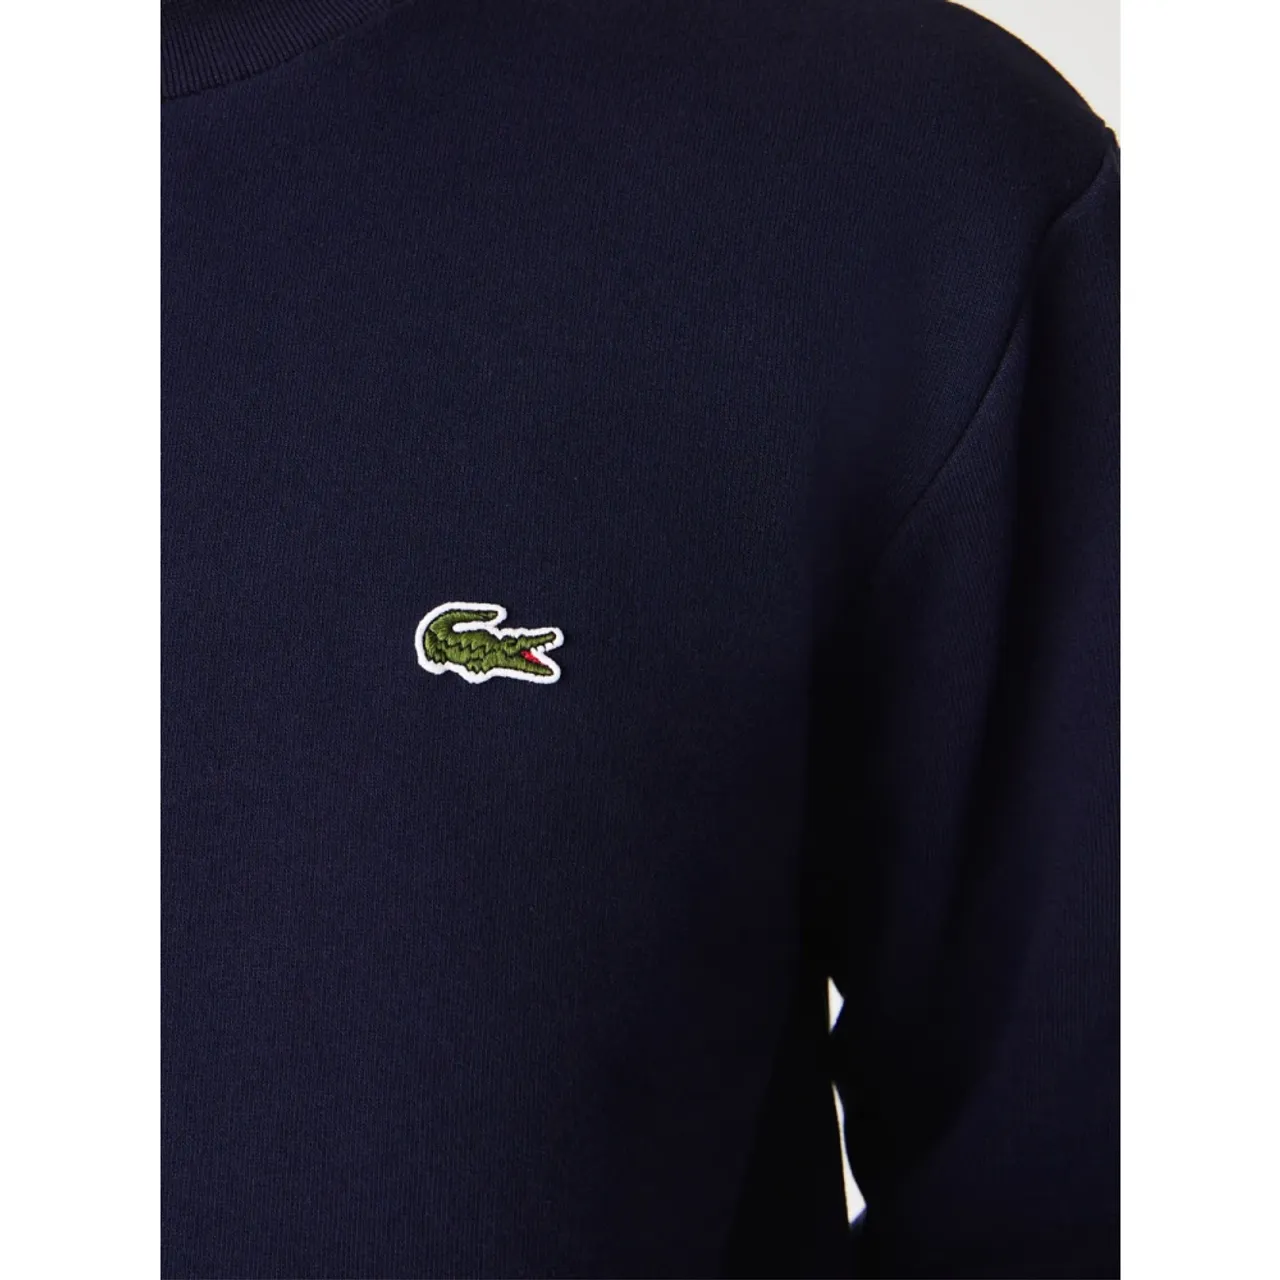 Lacoste , Blue Casual Sweater for Men ,Blue male, Sizes: